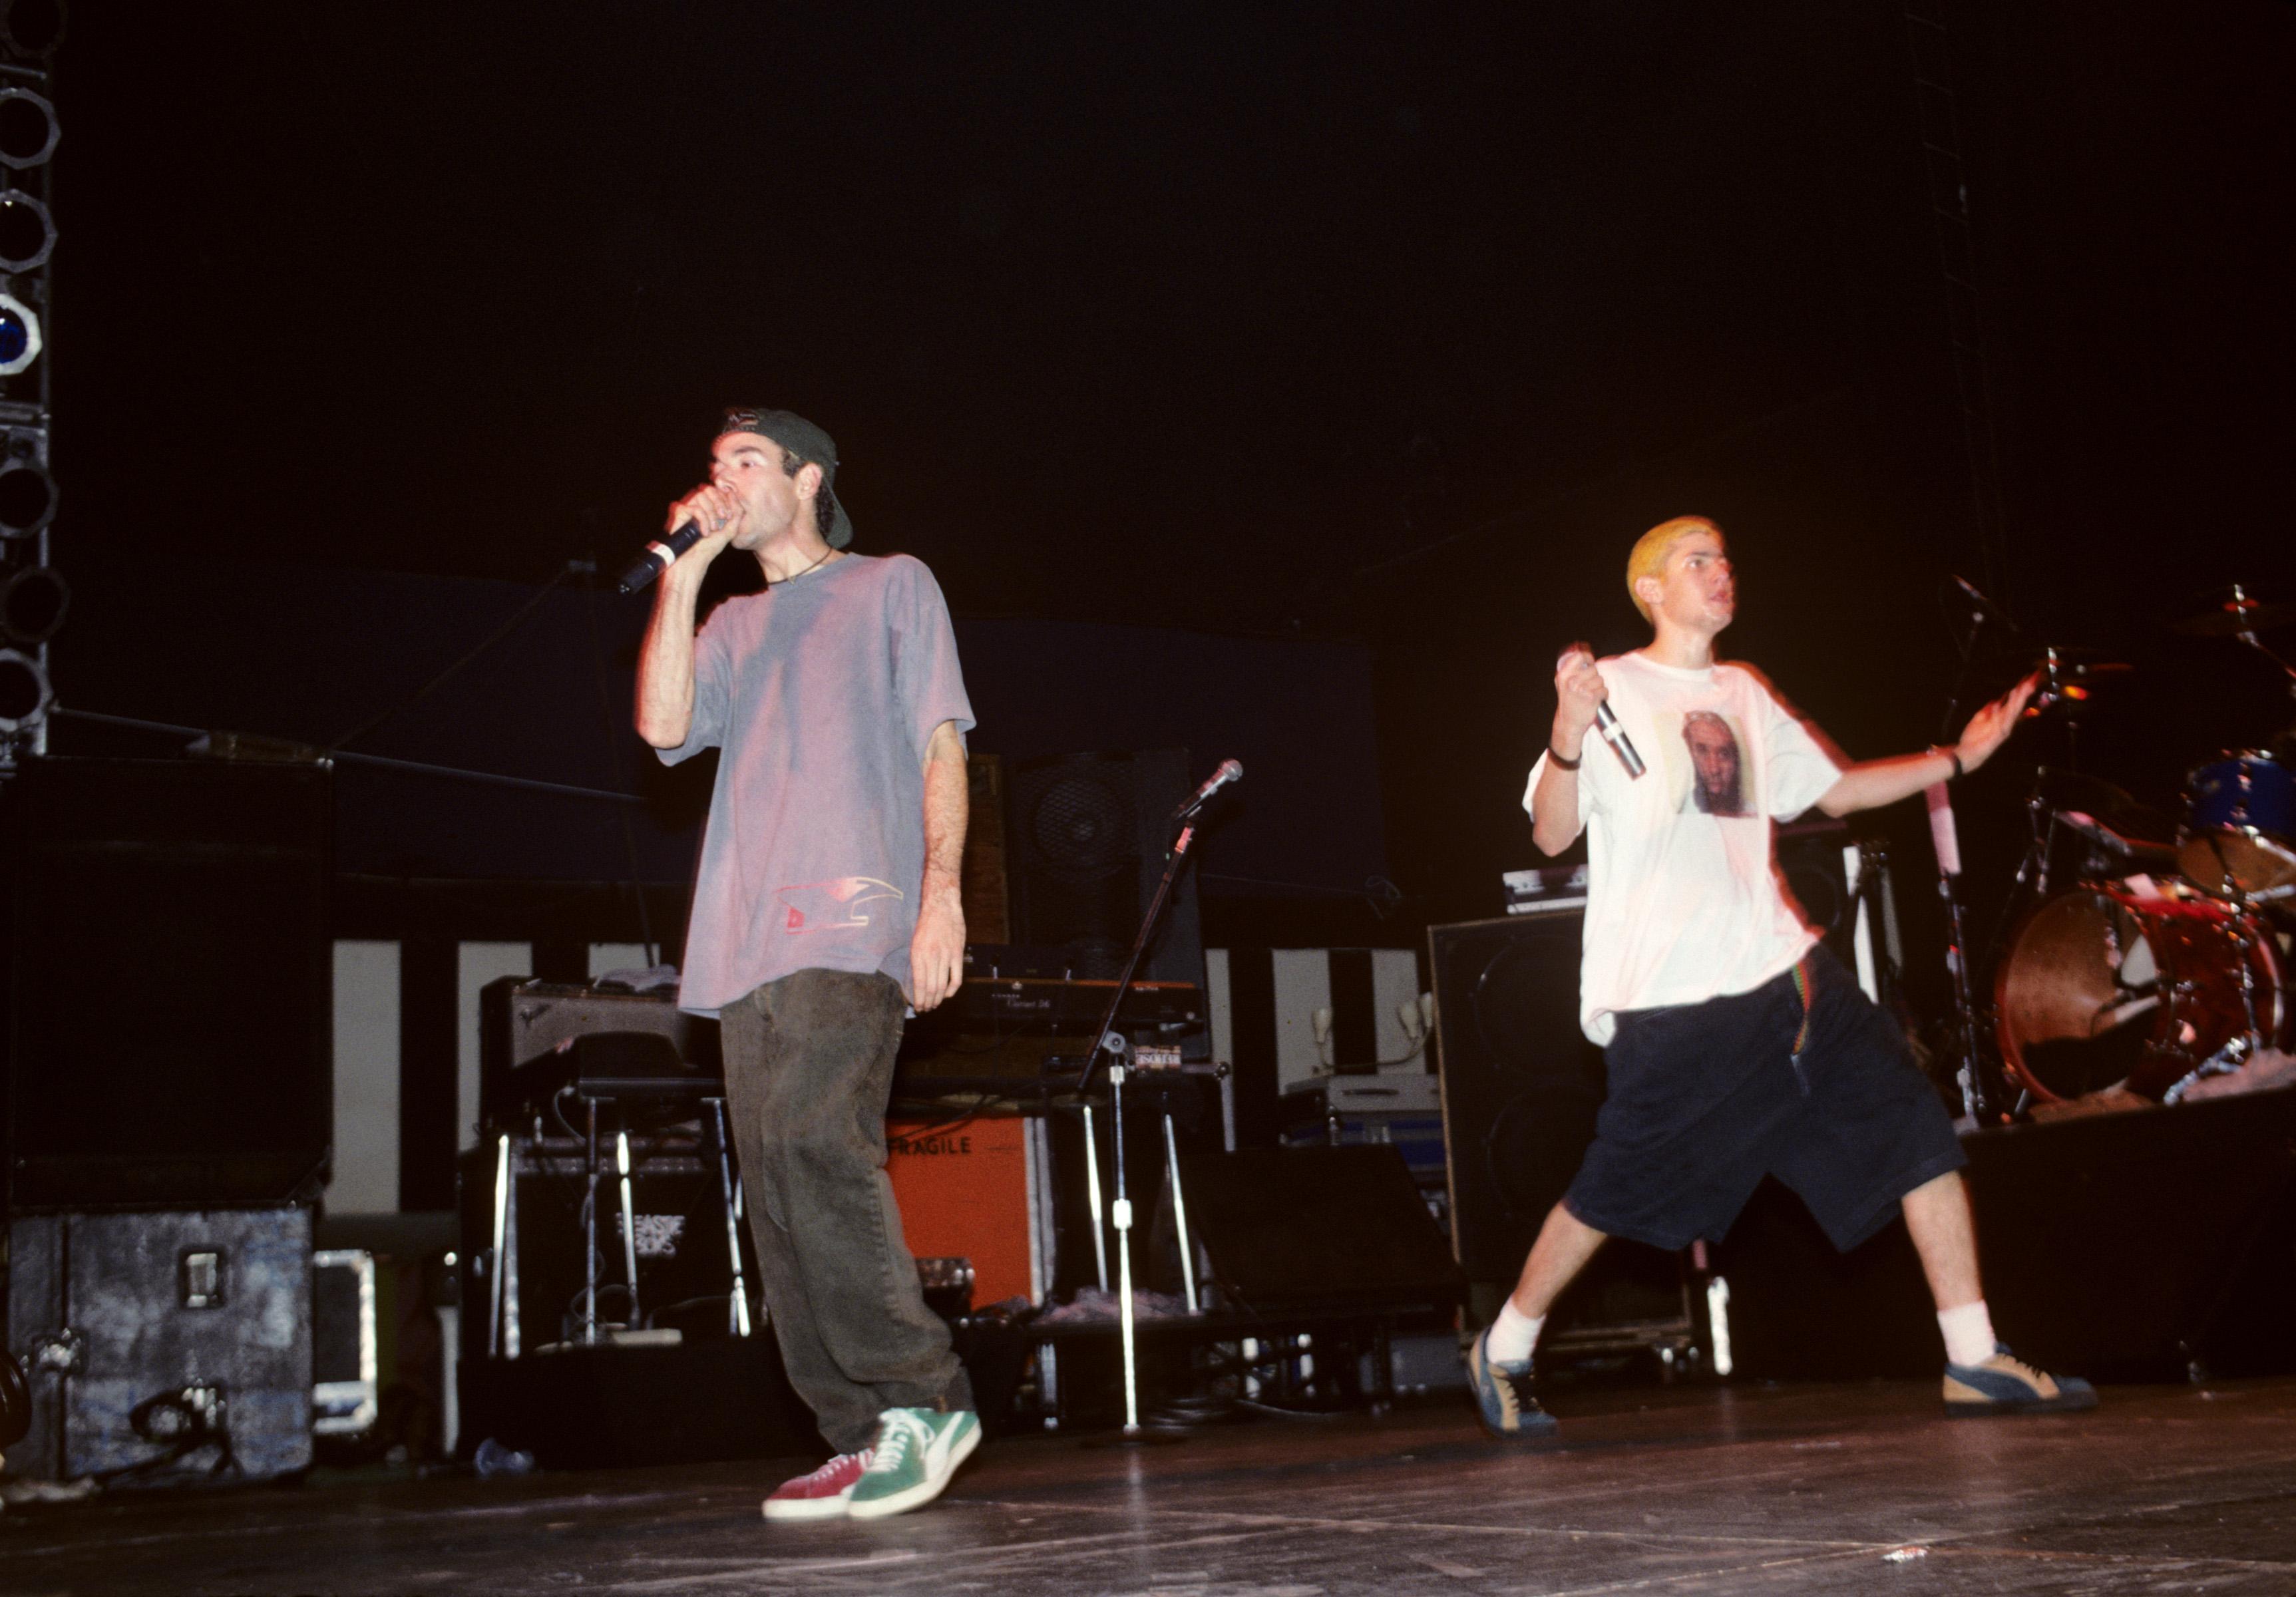 The Beastie Boys perform at Roseland in New York City on November 7, 1992.